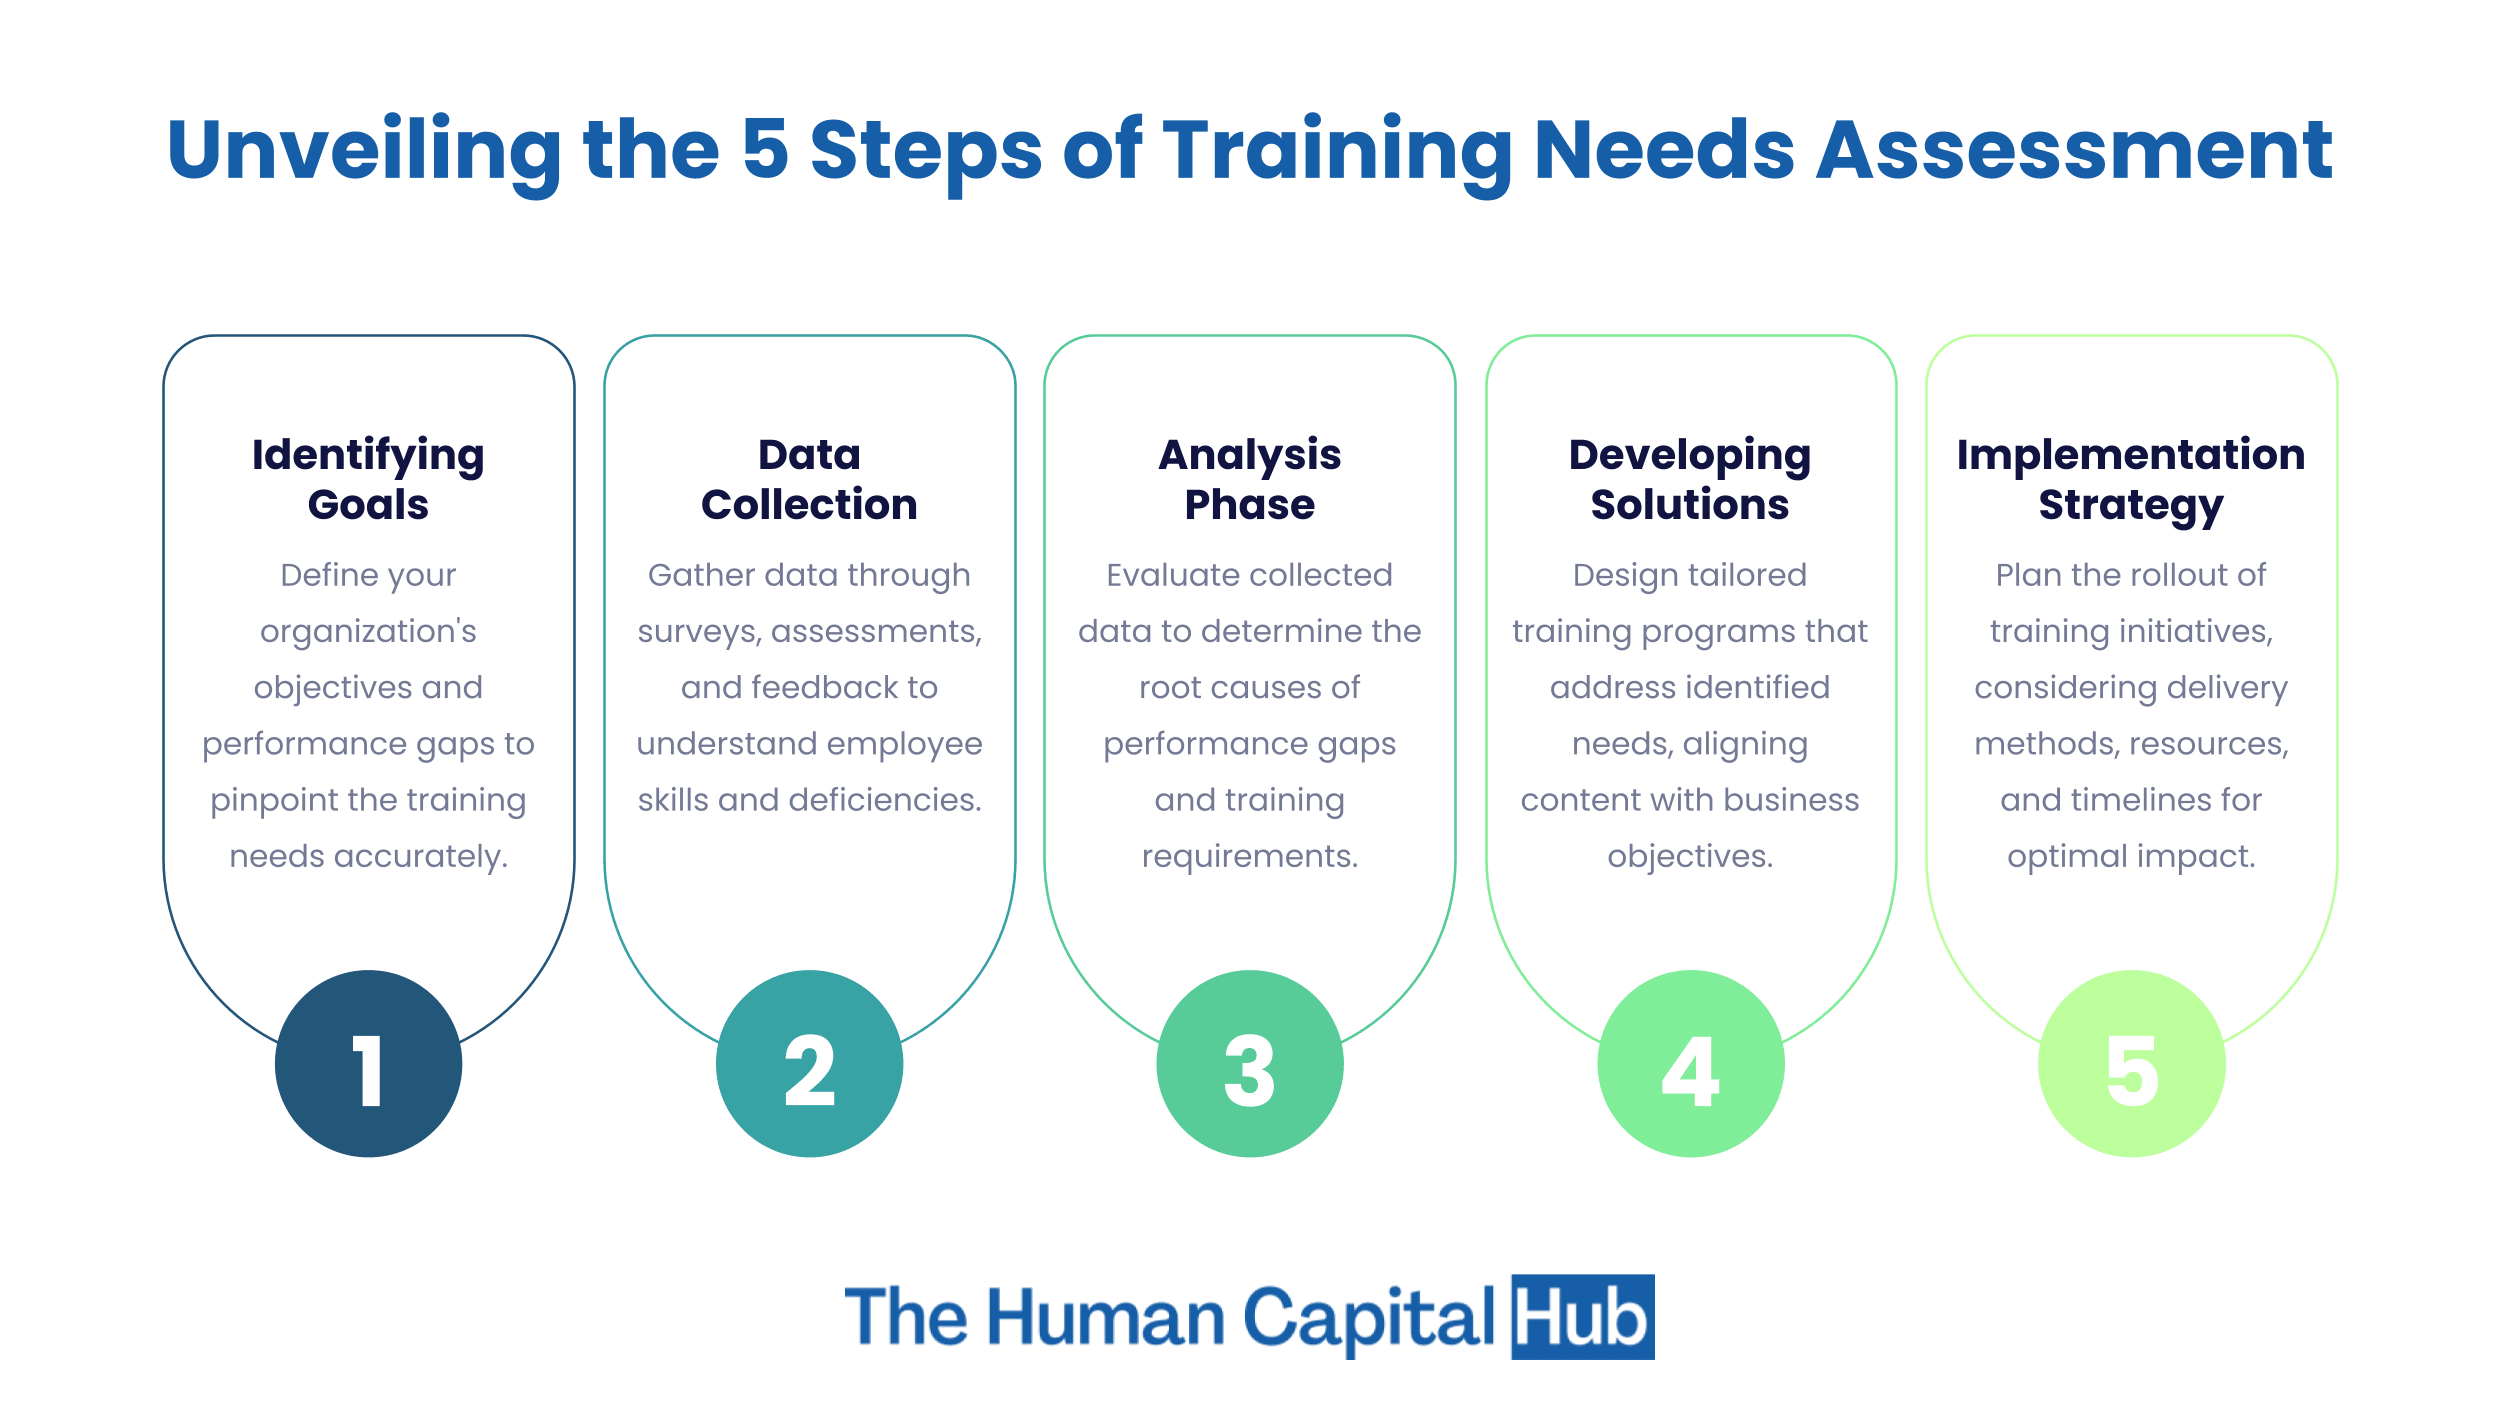 What are the 5 Steps of Training Needs Assessment?